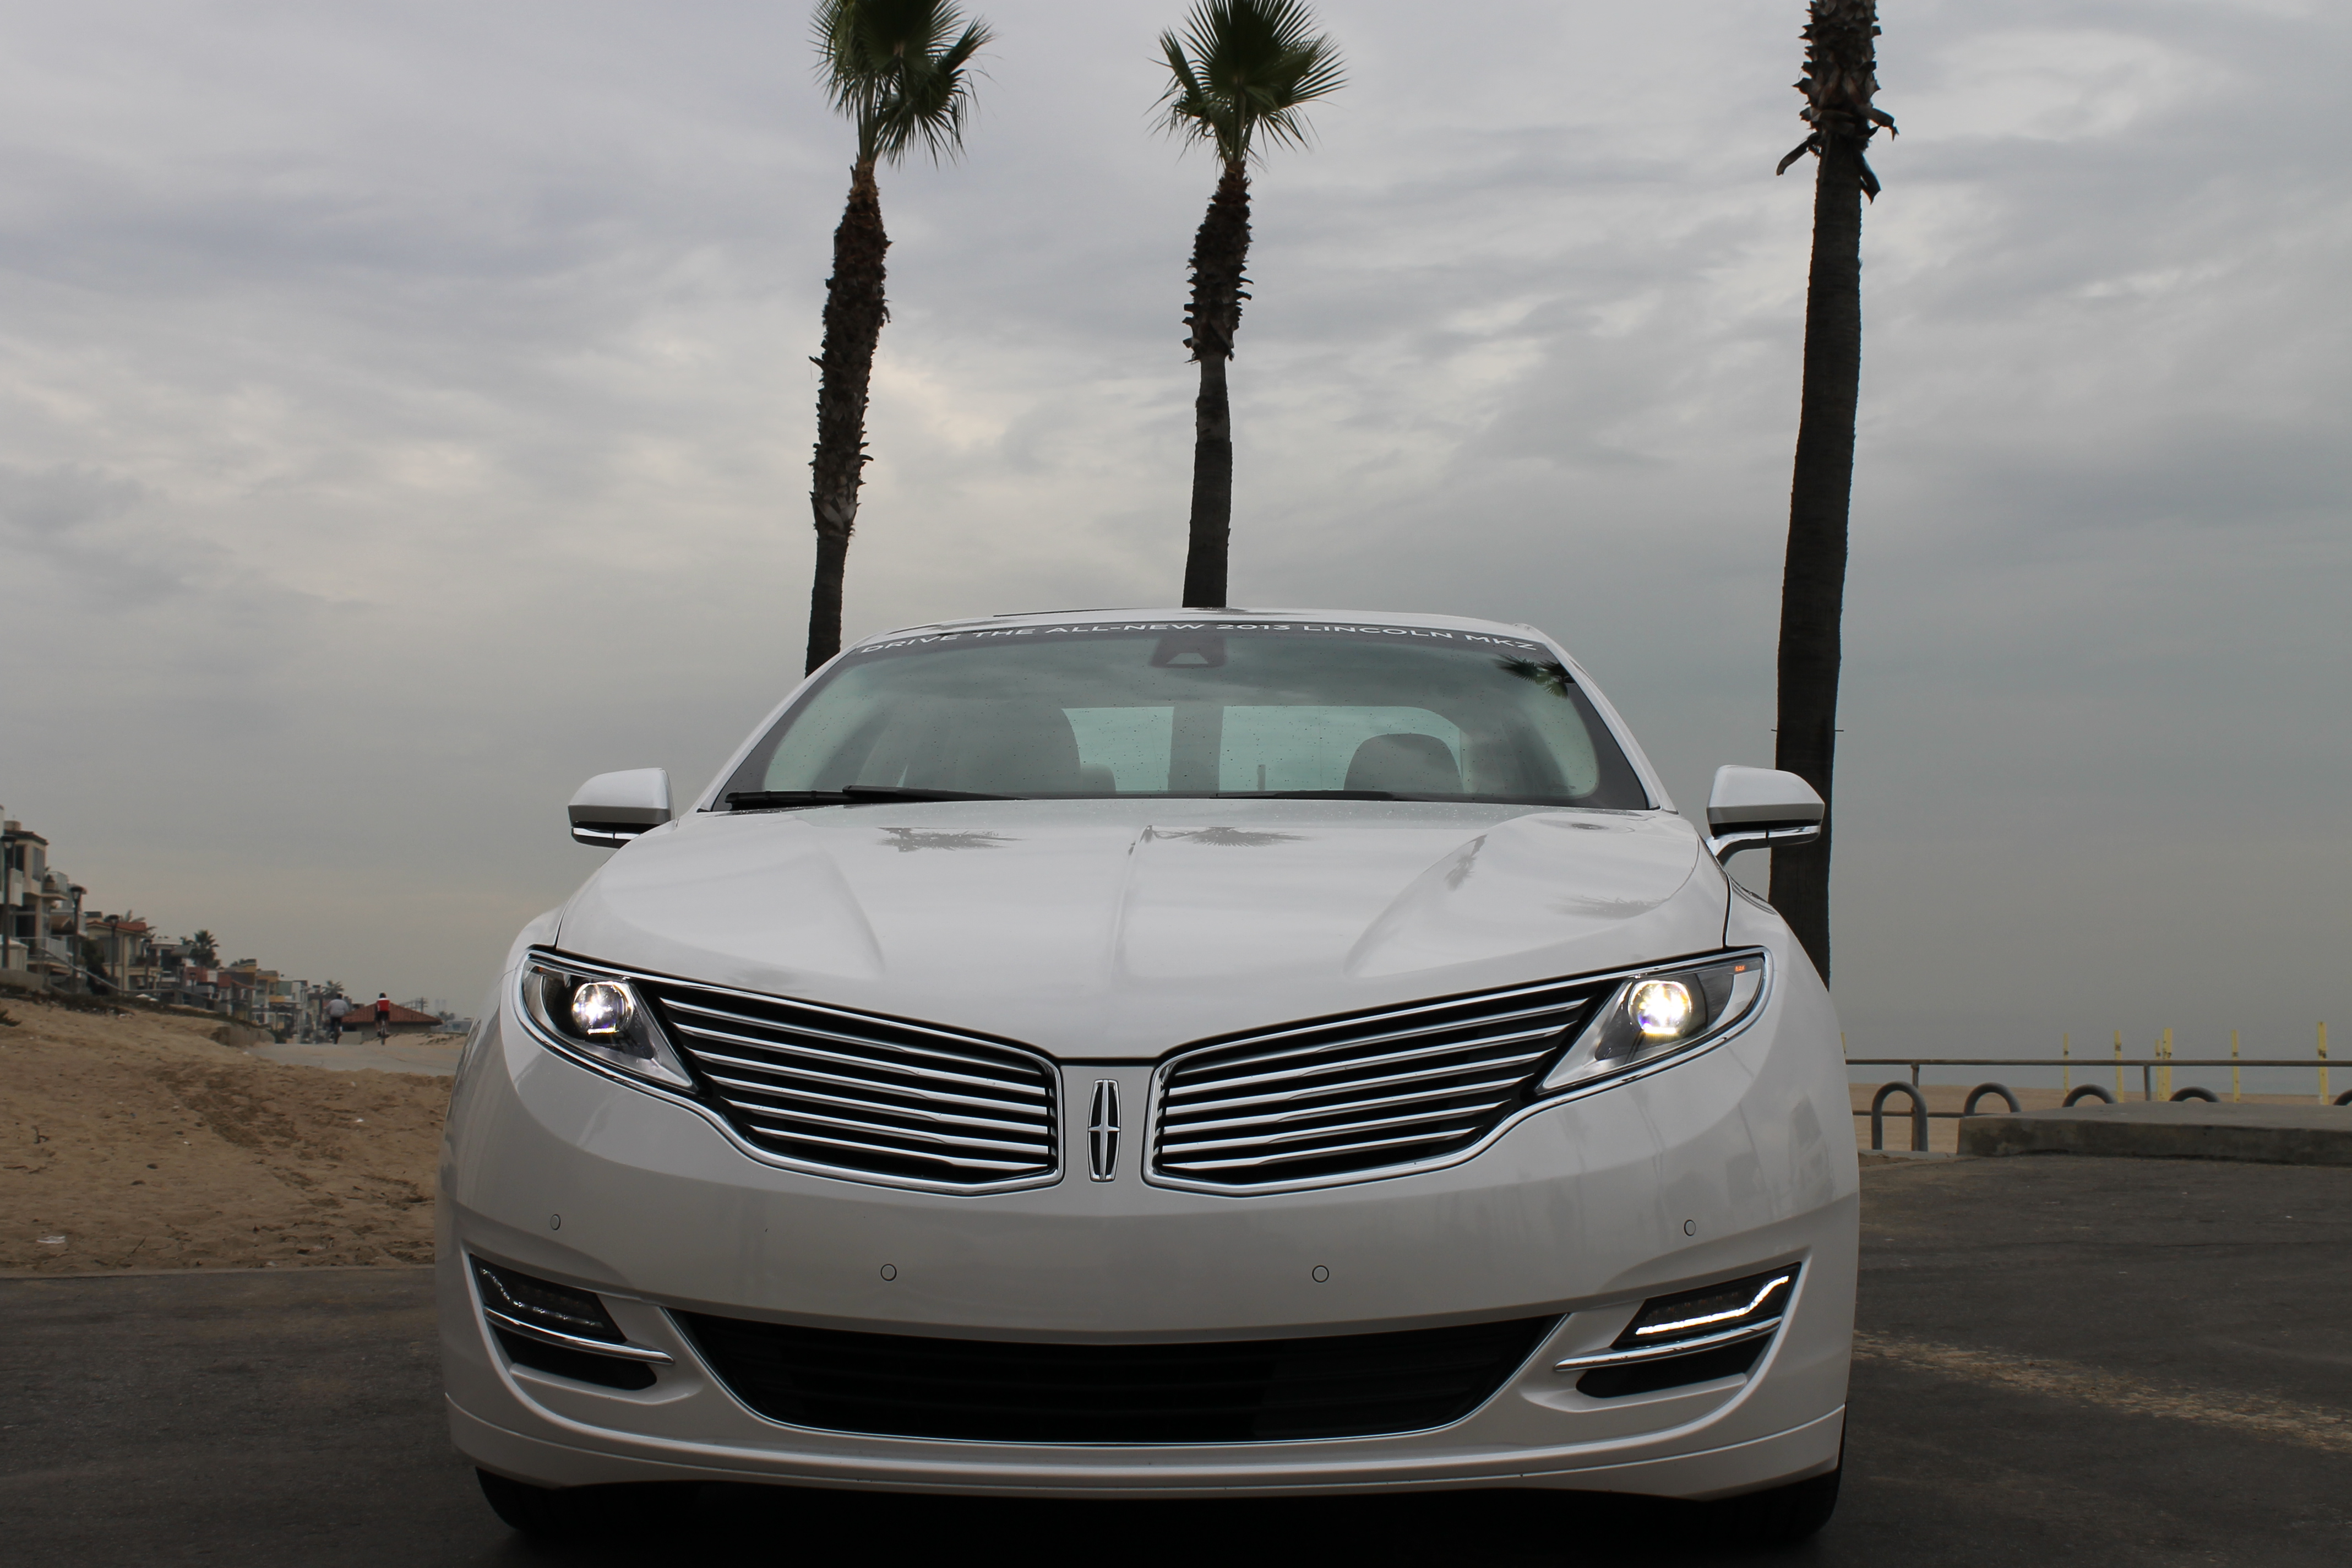 Road Test : 2013 Lincoln MKZ Hybrid "The Great White Hope" -  TheIgnitionBlog.com